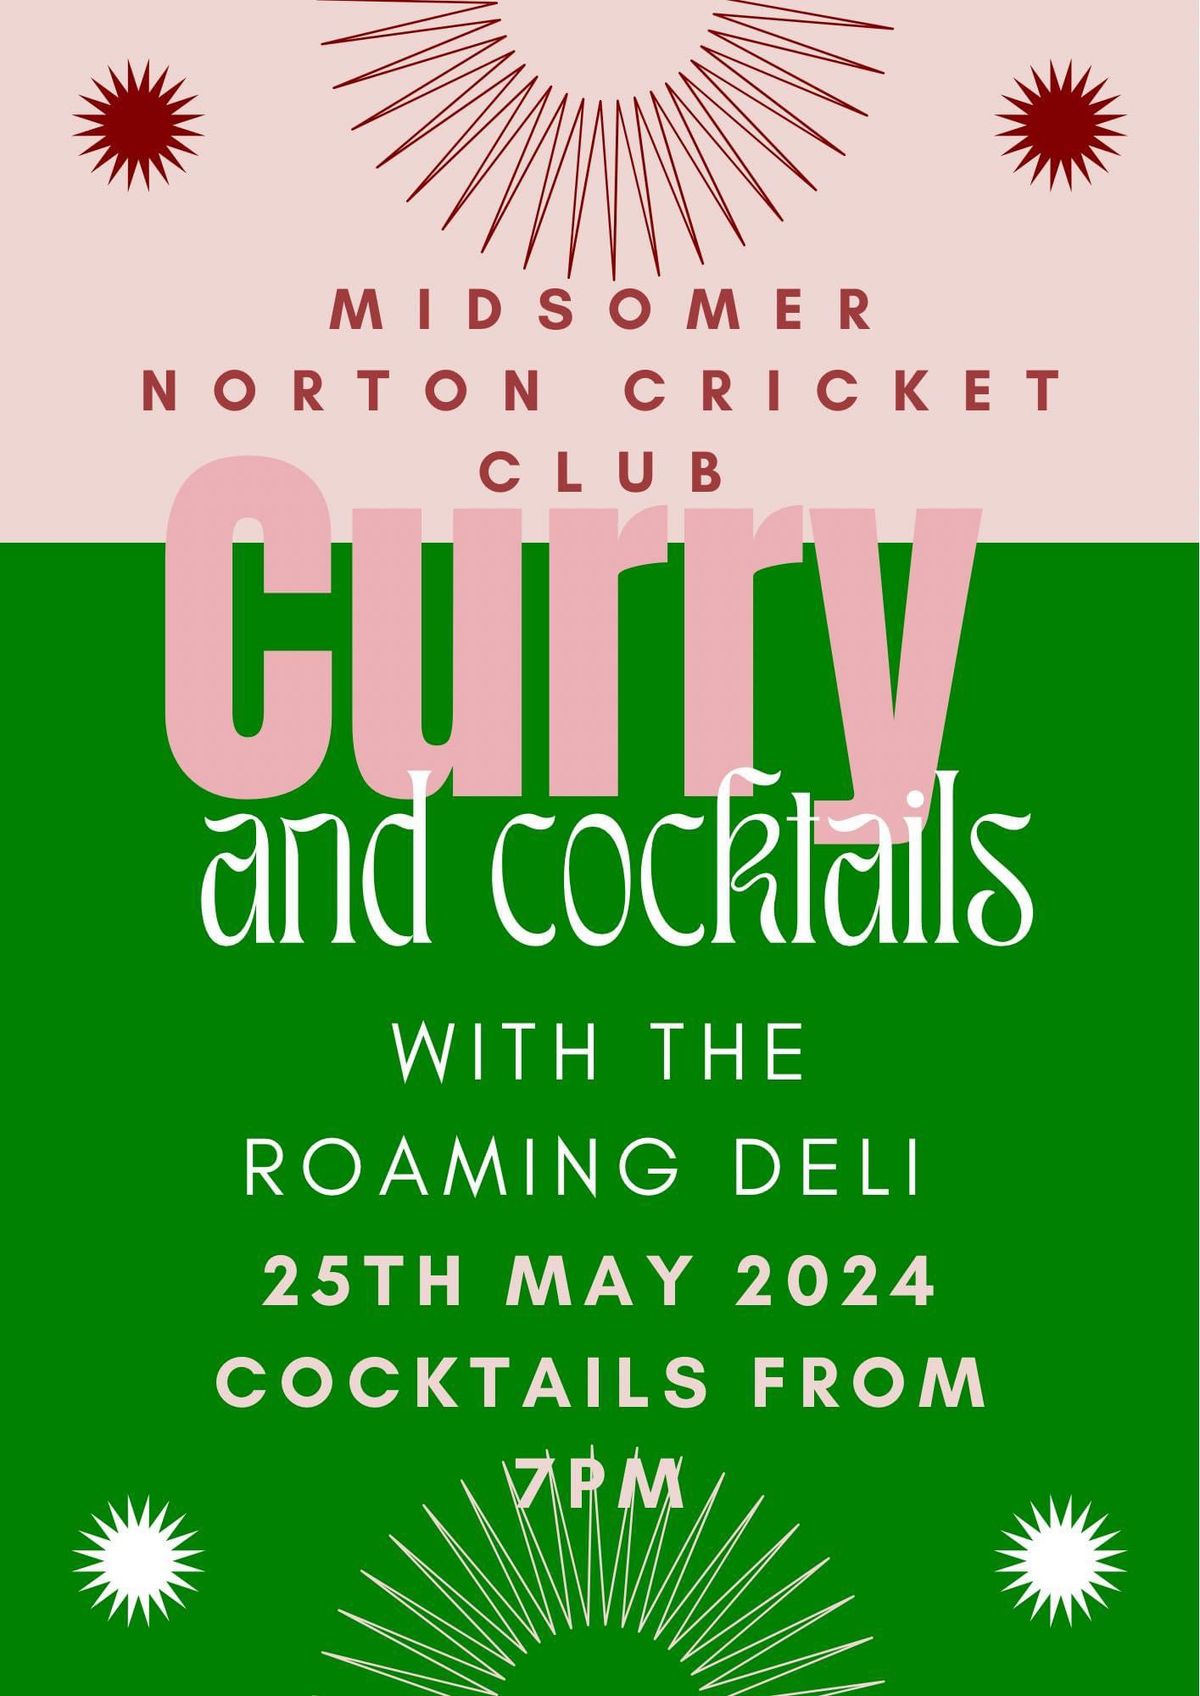 Curry and Cocktails with the Roaming Deli 